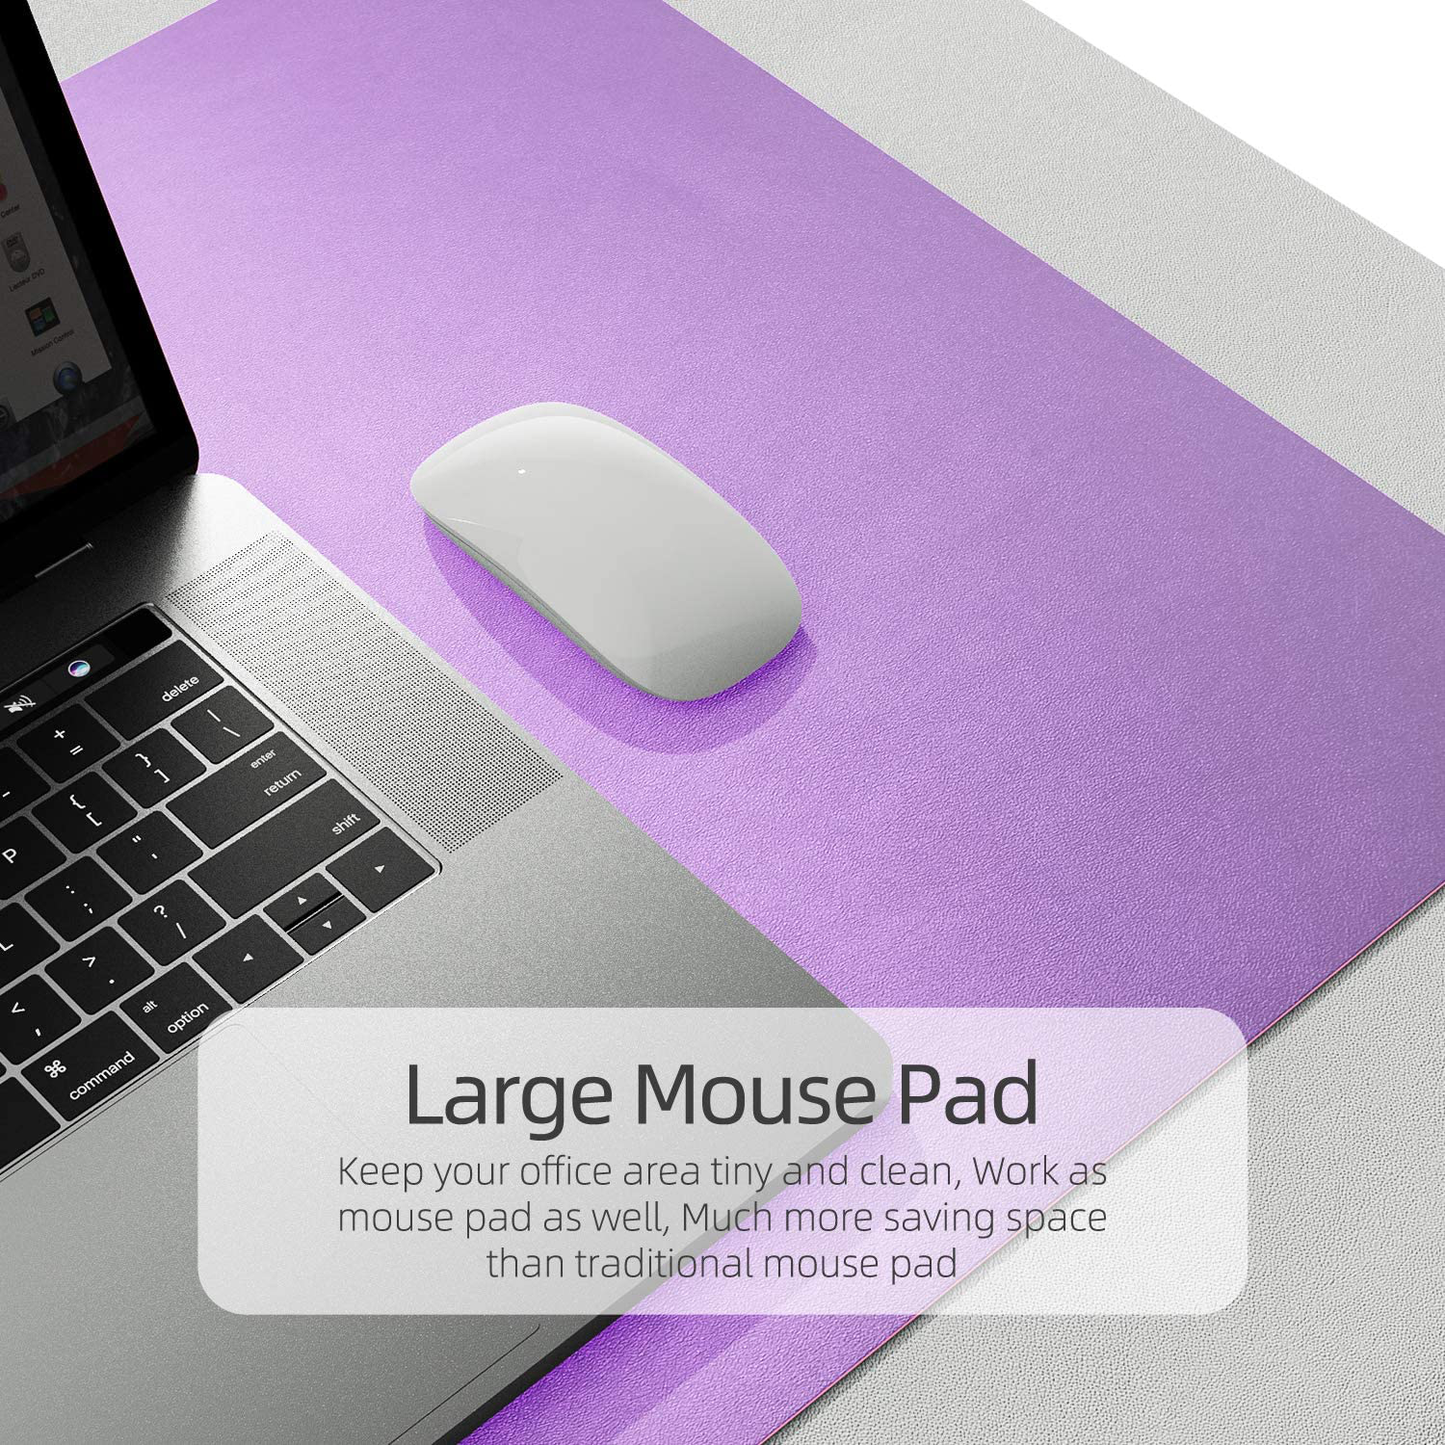 YSAGi Multifunctional Office Desk Pad, Ultra Thin Waterproof PU Leather Mouse Pad, Dual Use Desk Writing Mat for Office/Home (23.6" x 13.7", Aconite Violet+Eosine Pink)